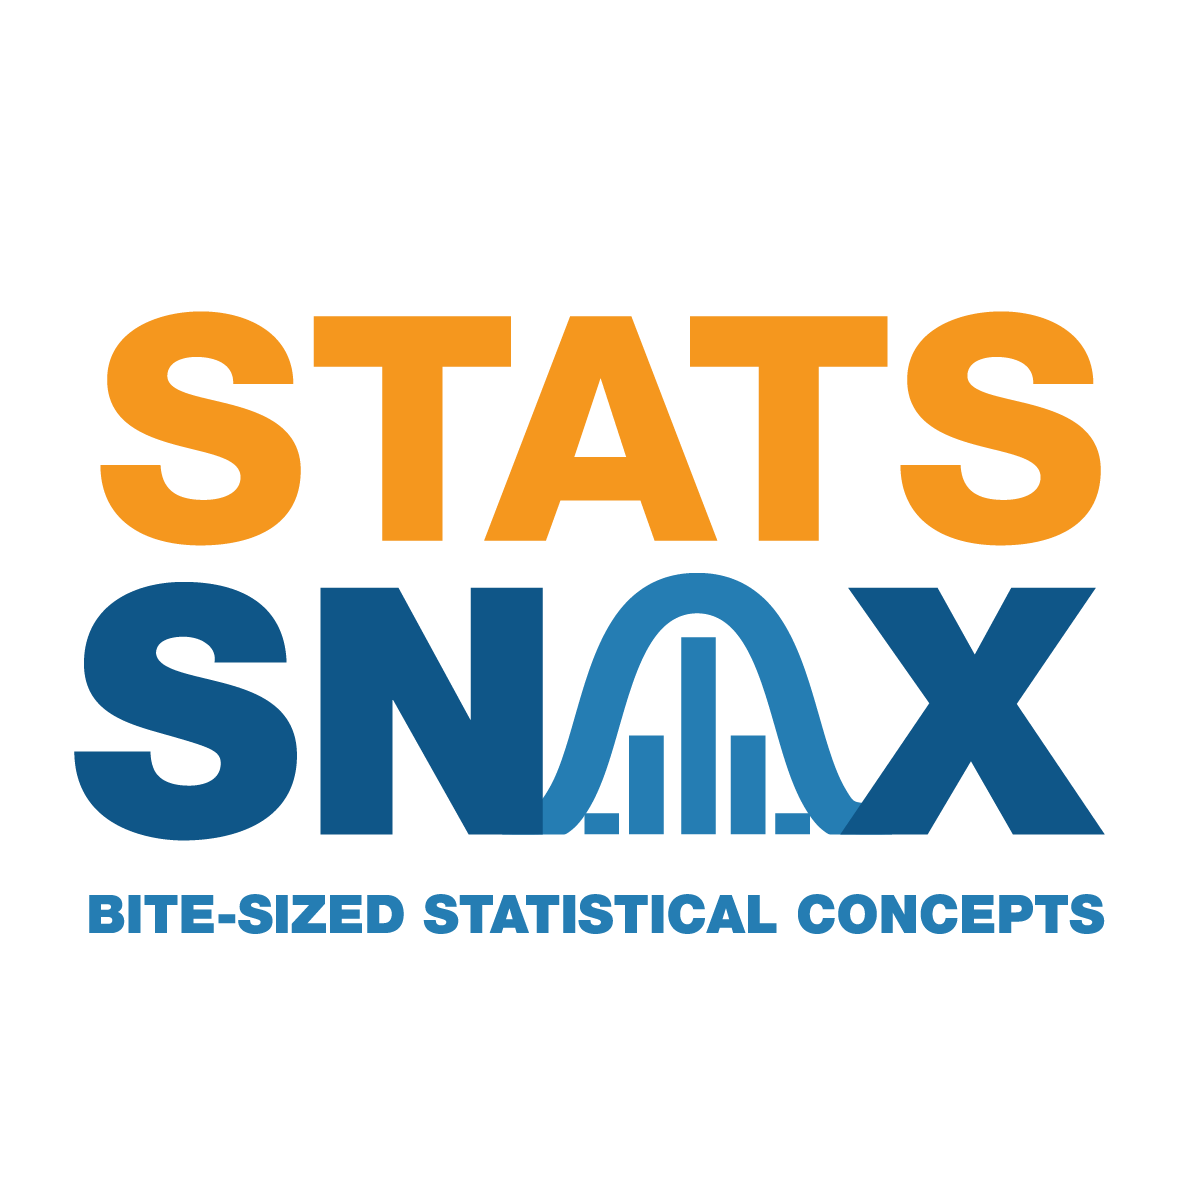 Stats Snax: Bite-sized Statistical Concepts